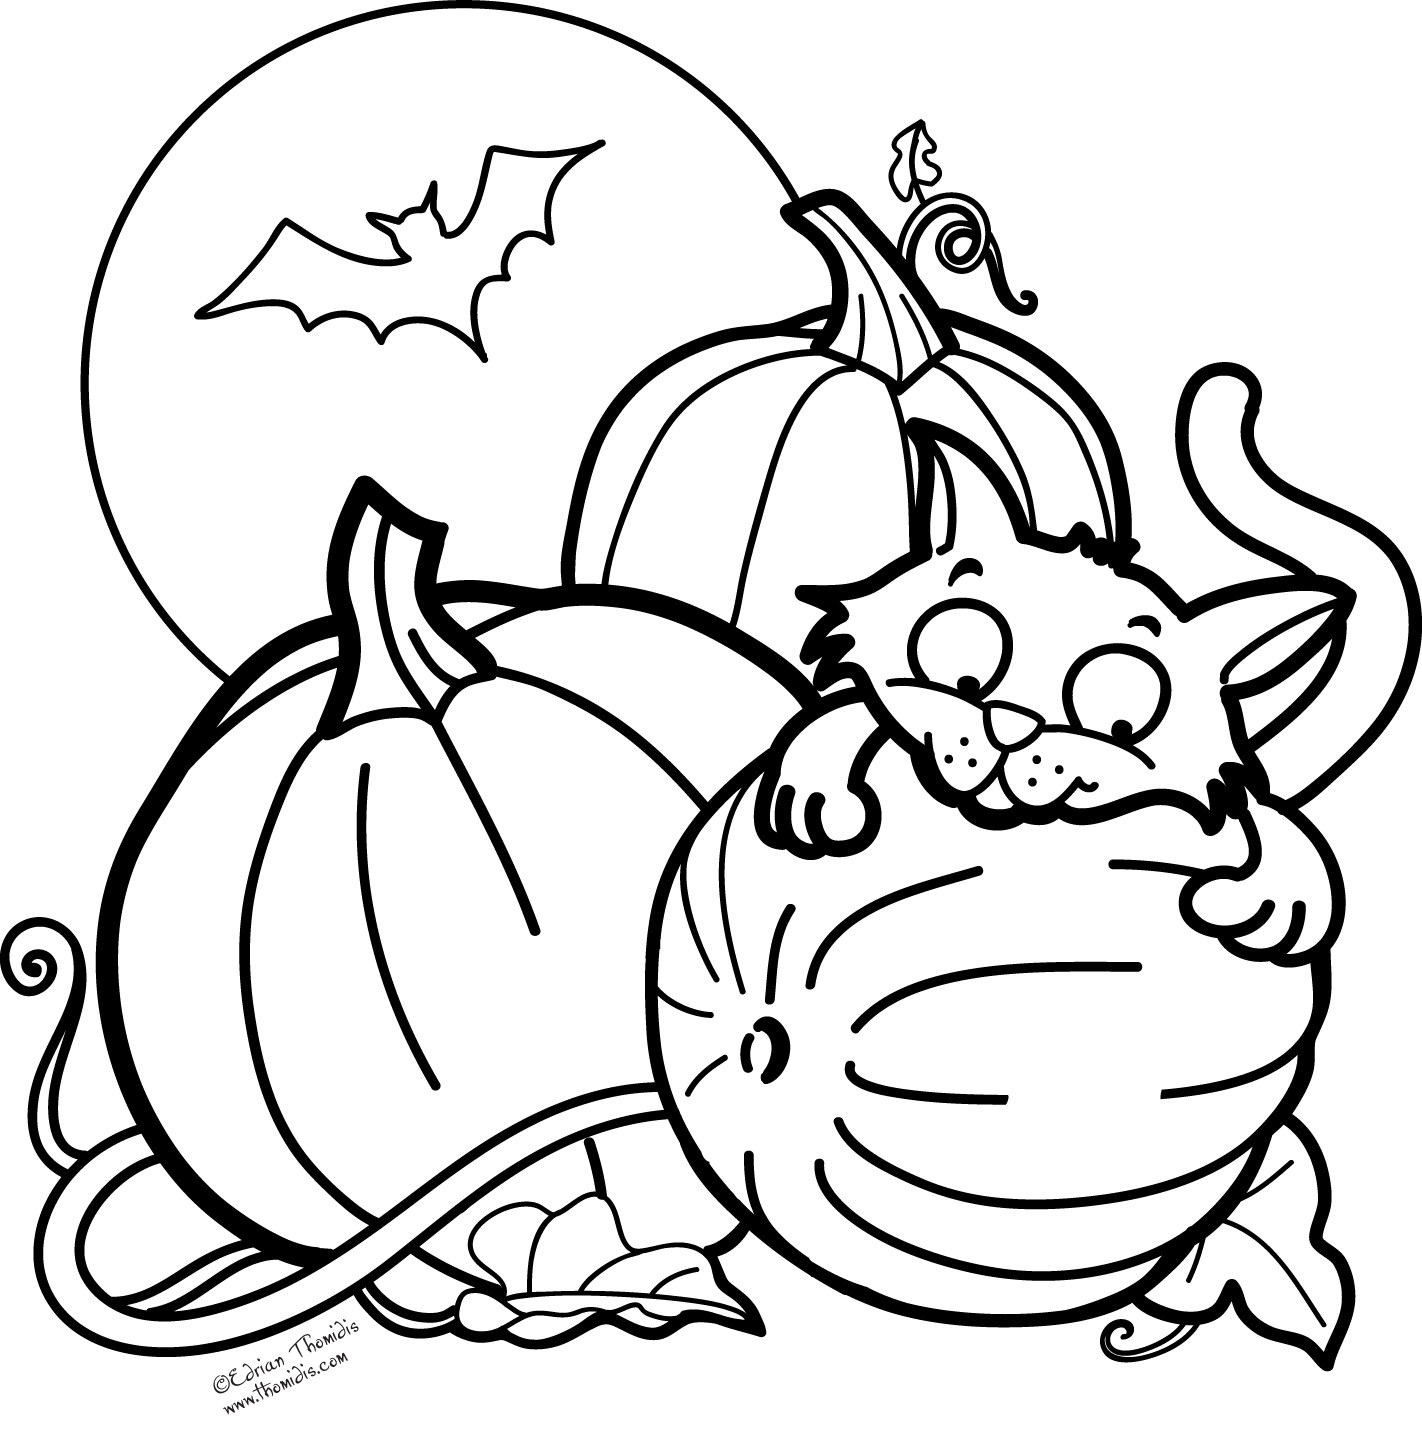 Free Printable Halloween Coloring Pages
 A picture paints a thousand words Pumpkin Cat and a Bat